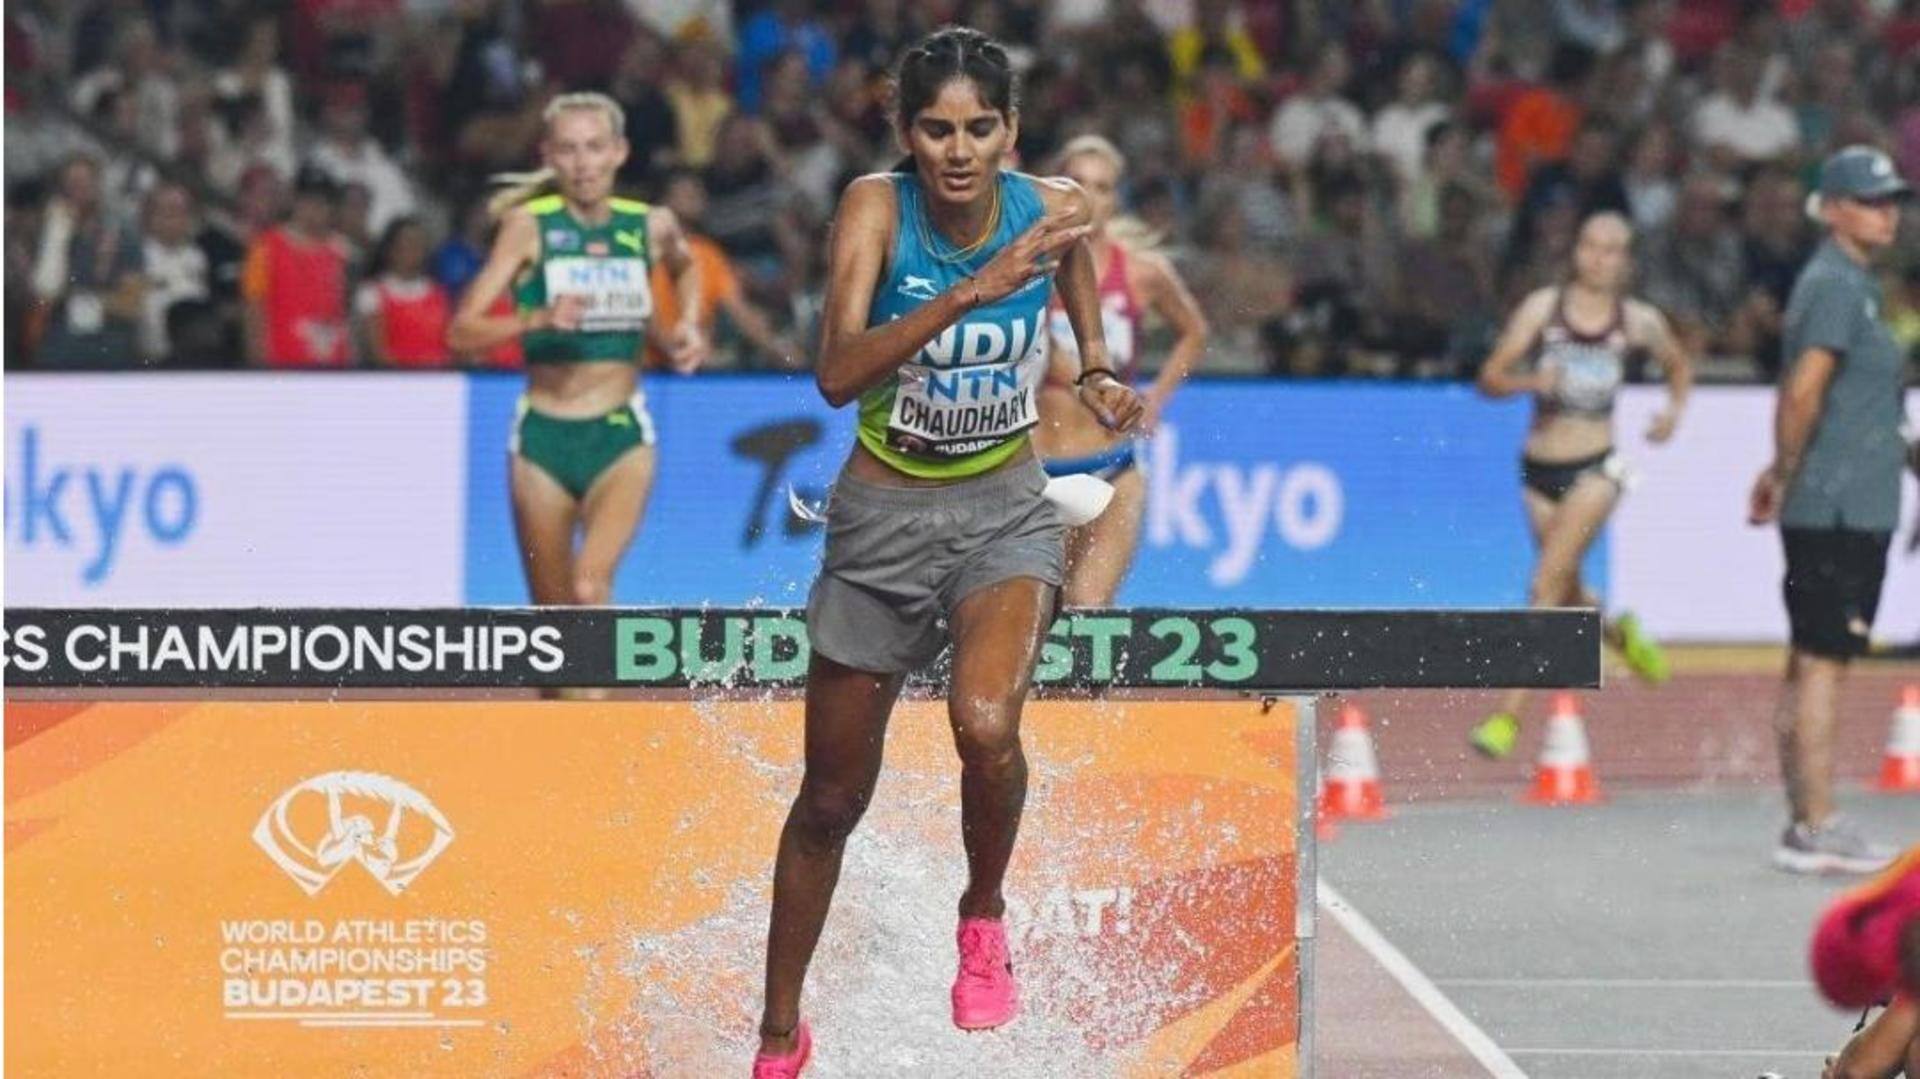 Parul Chaudhary sets national record in 3000m steeplechase: Key achievements